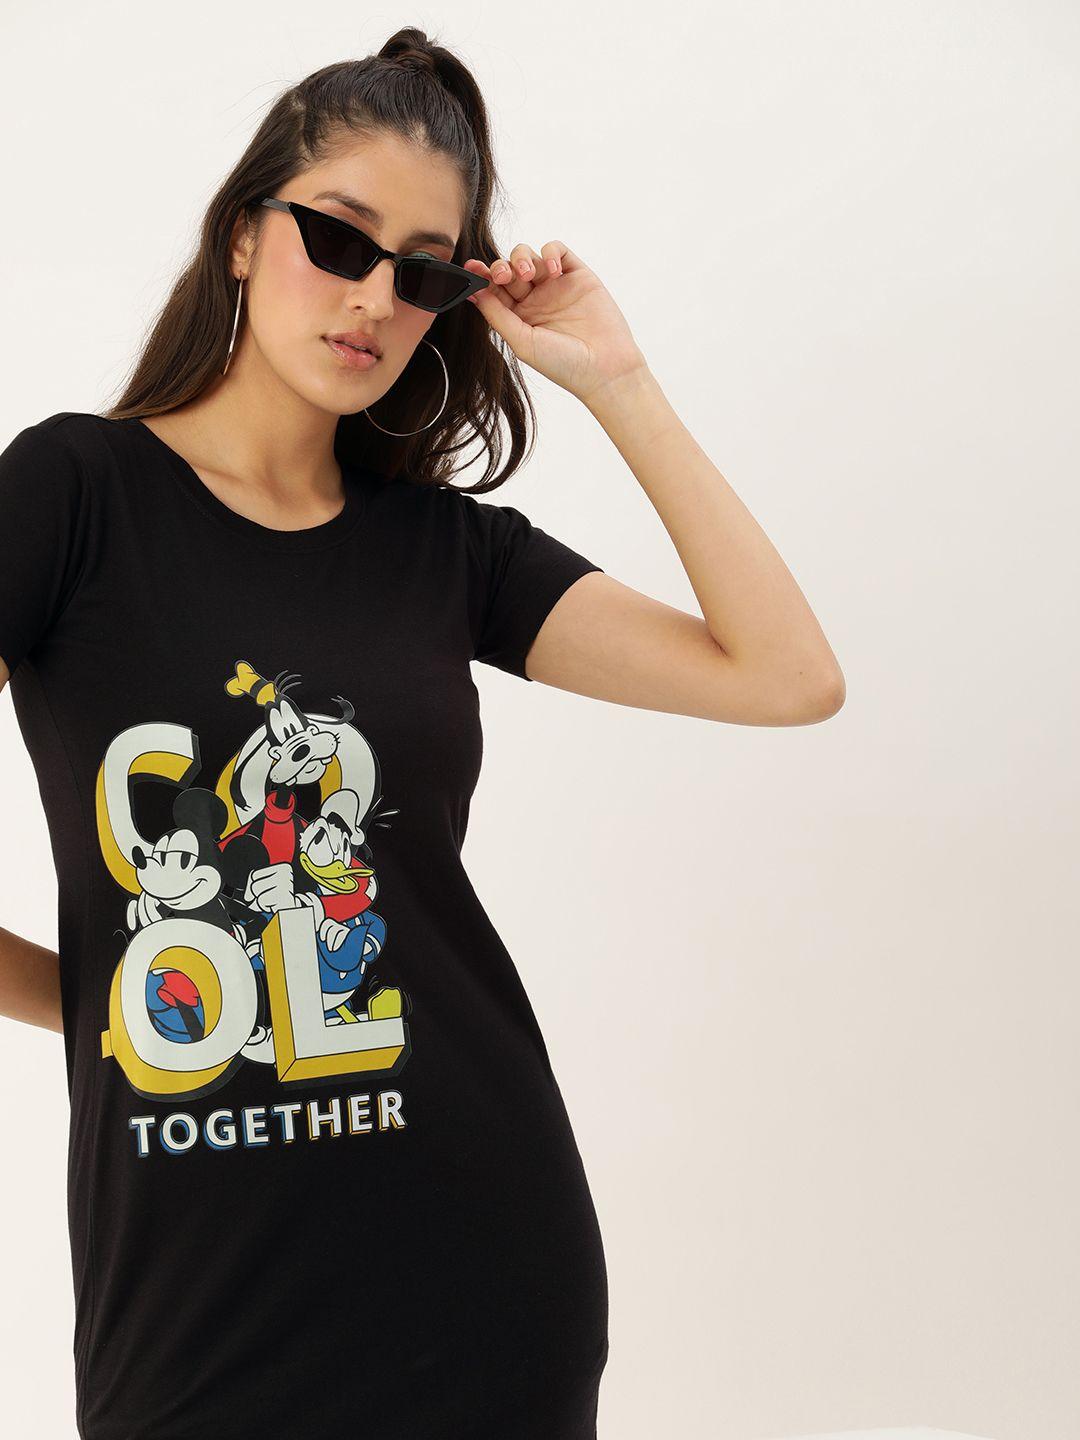 kook n keech disney comfy fit mickey mouse graphic printed cotton t-shirt dress